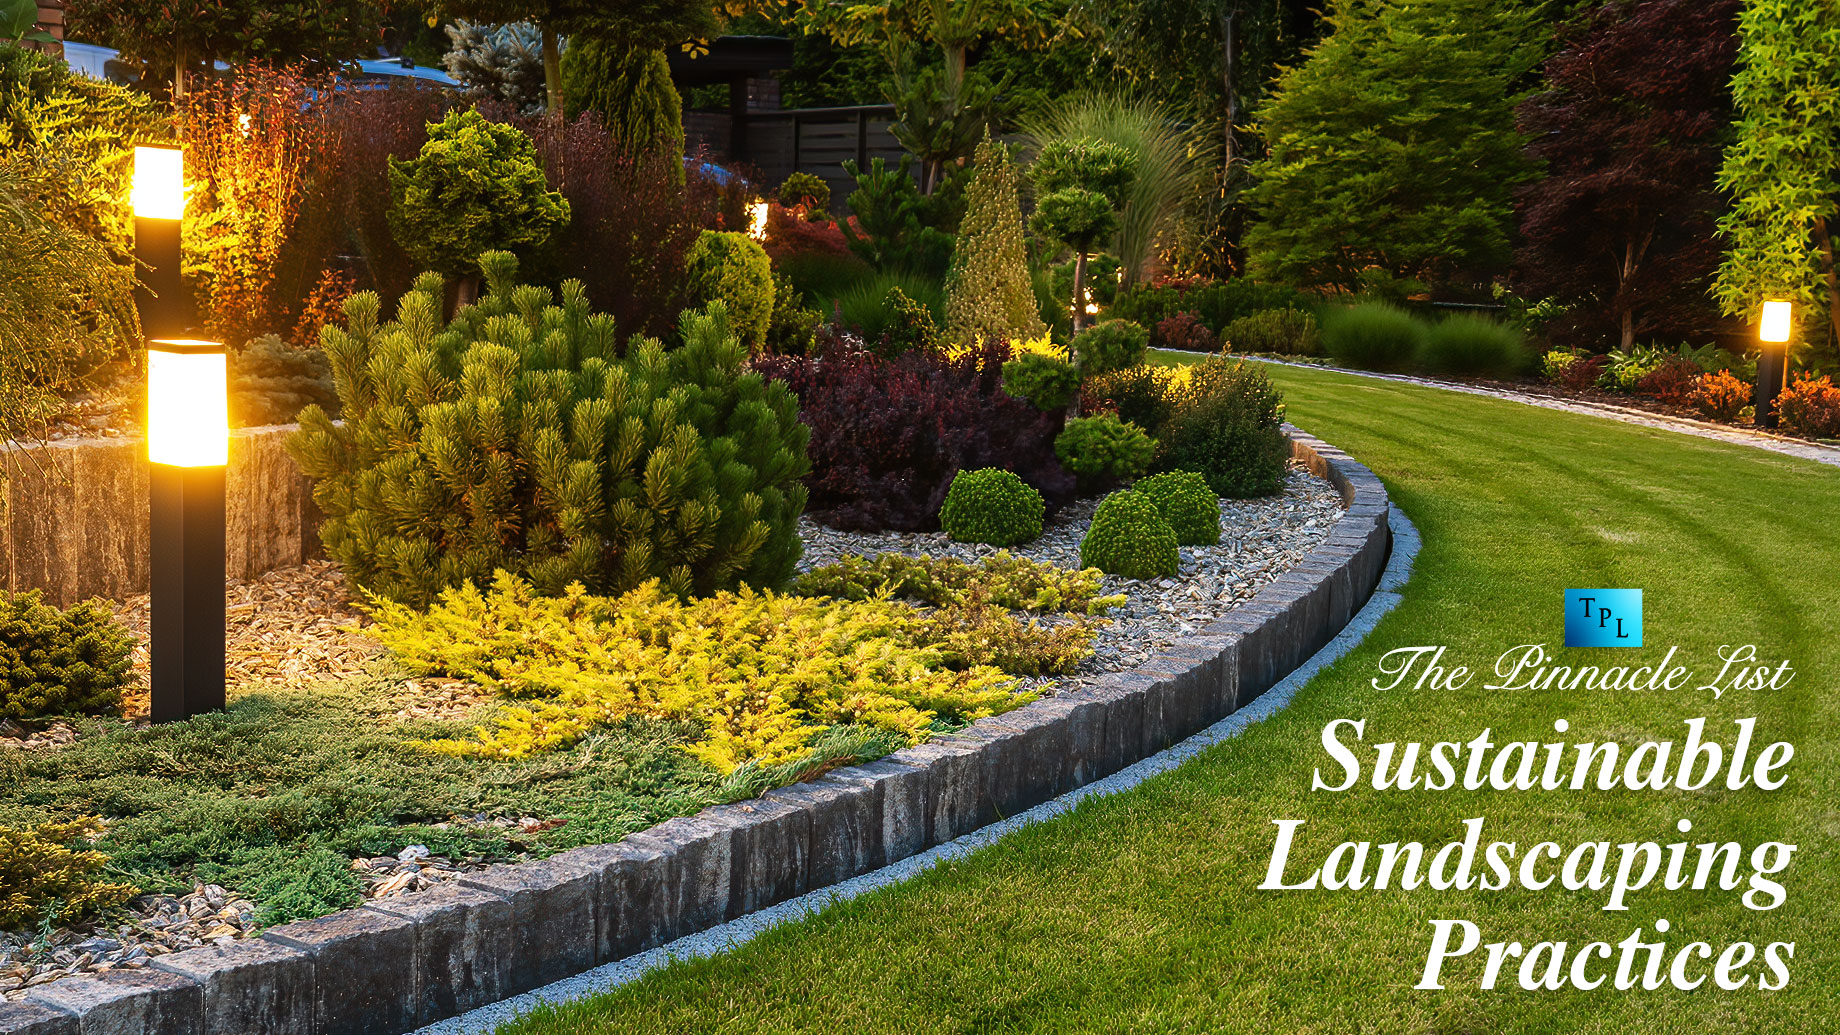 Sustainable Landscaping Practices